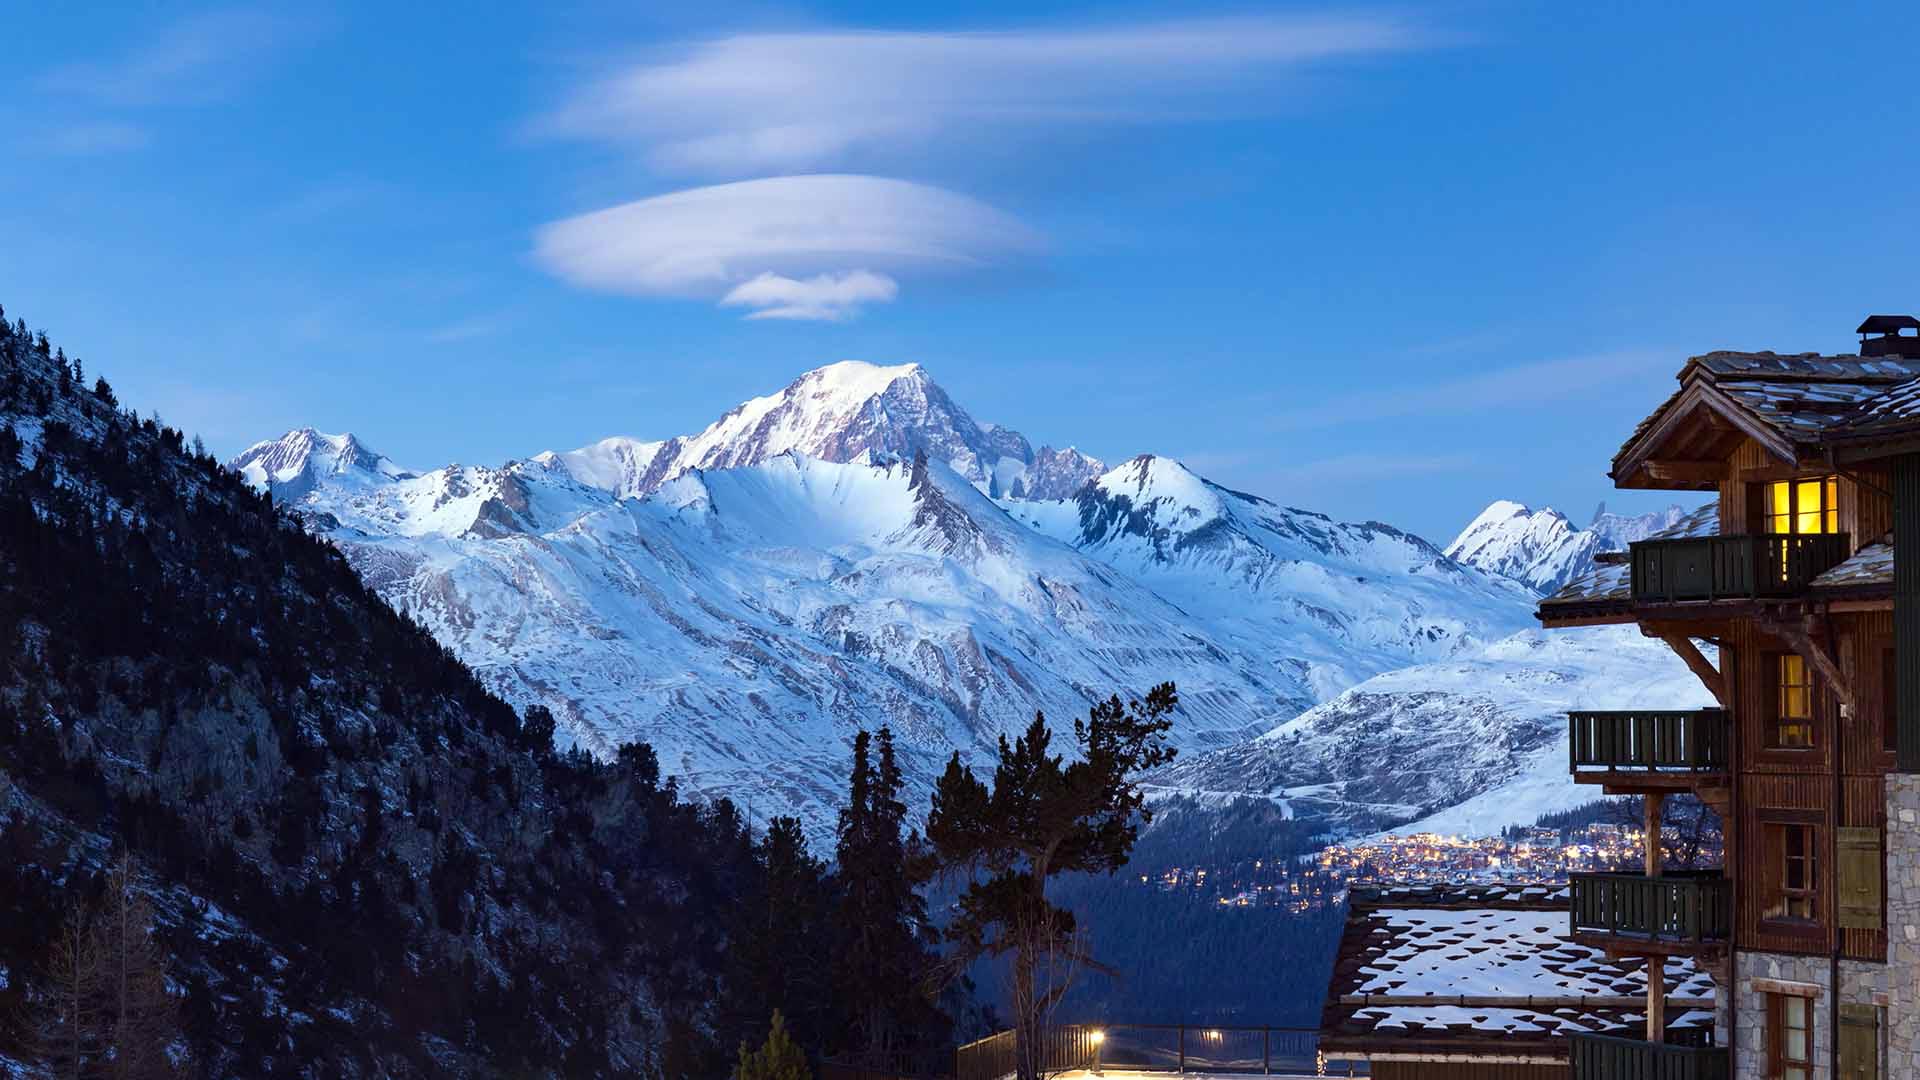 Travel to Mont Blanc, if you Love Trekking, Mountains & Nature